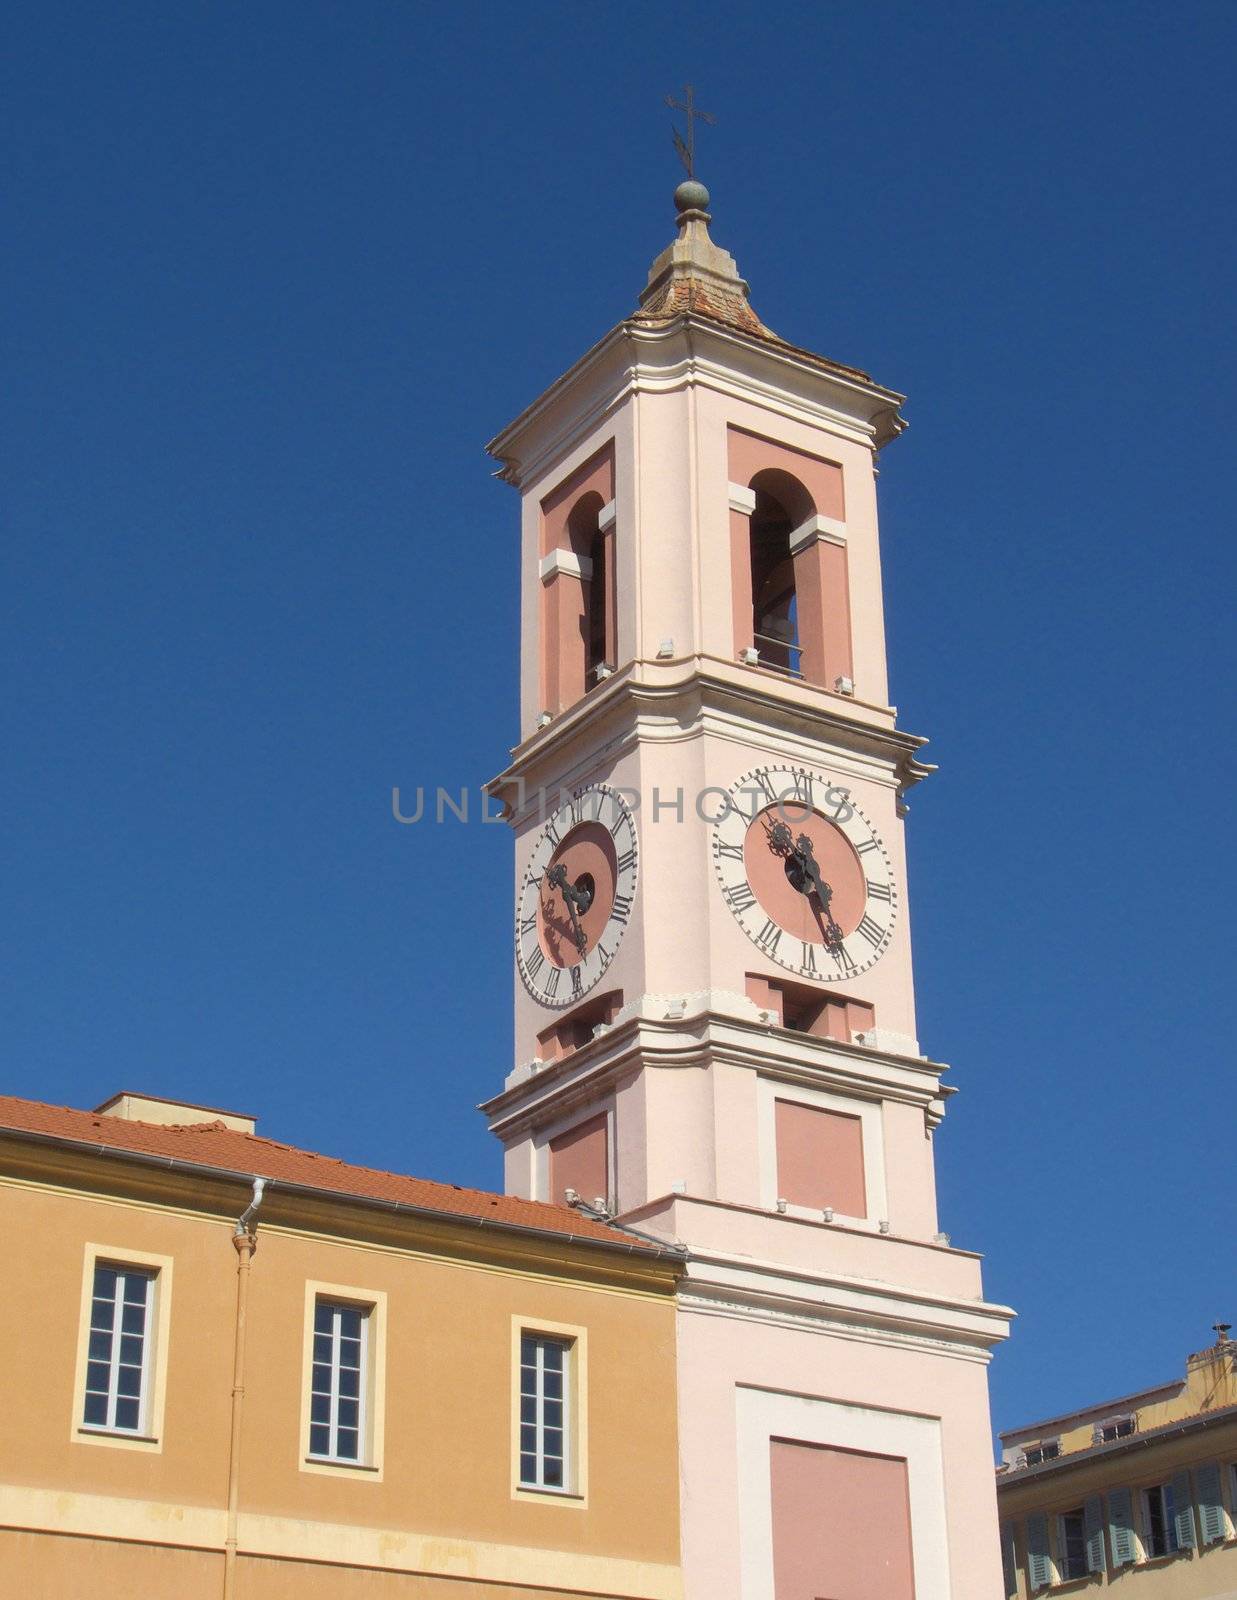 Clock Tower of the Rusca Palace by jbouzou